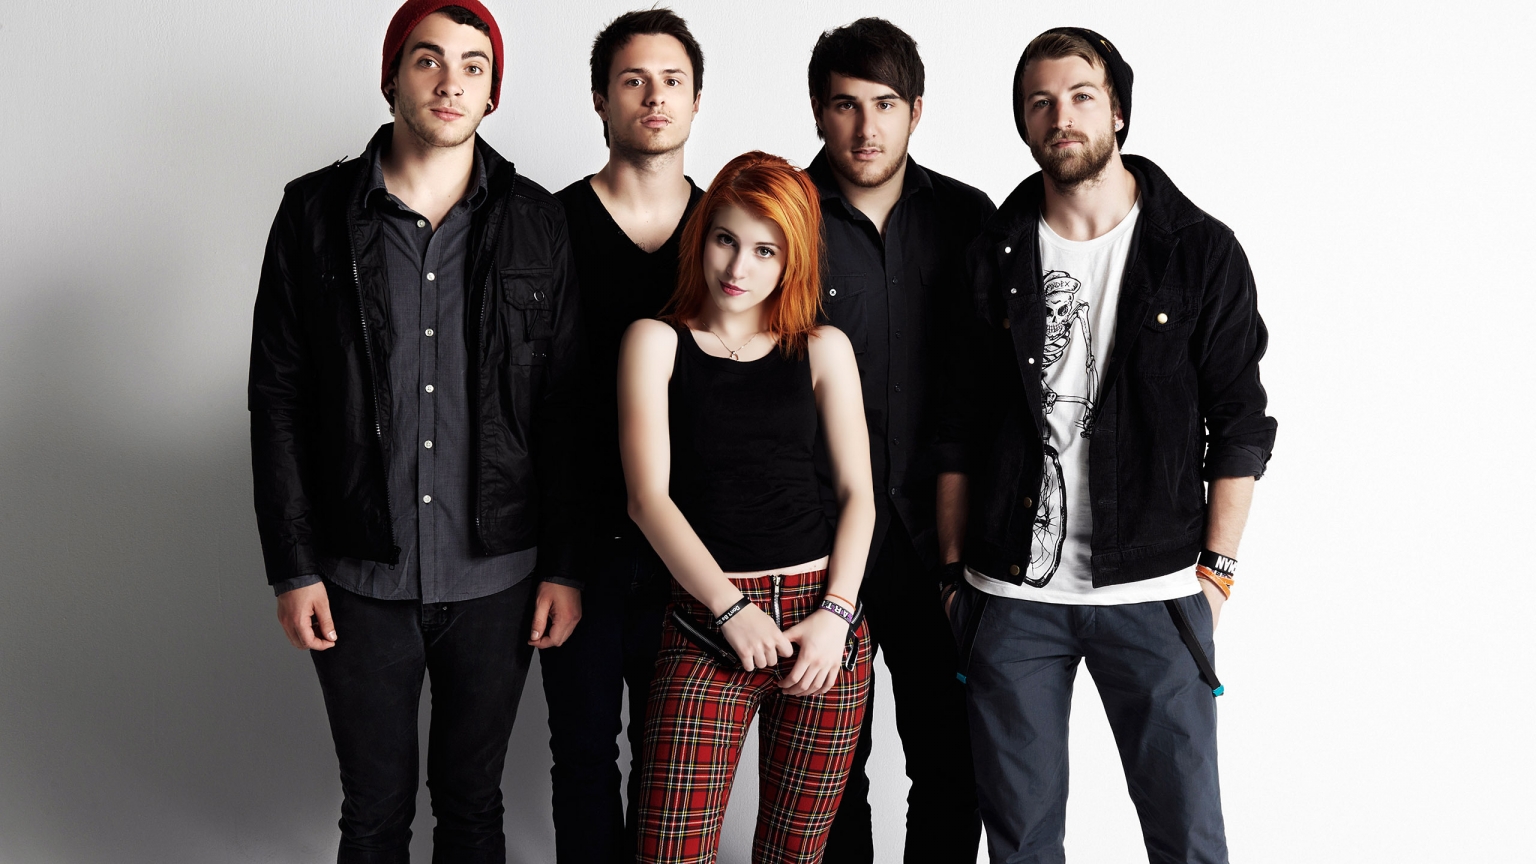 Hayley Williams and Paramore for 1536 x 864 HDTV resolution